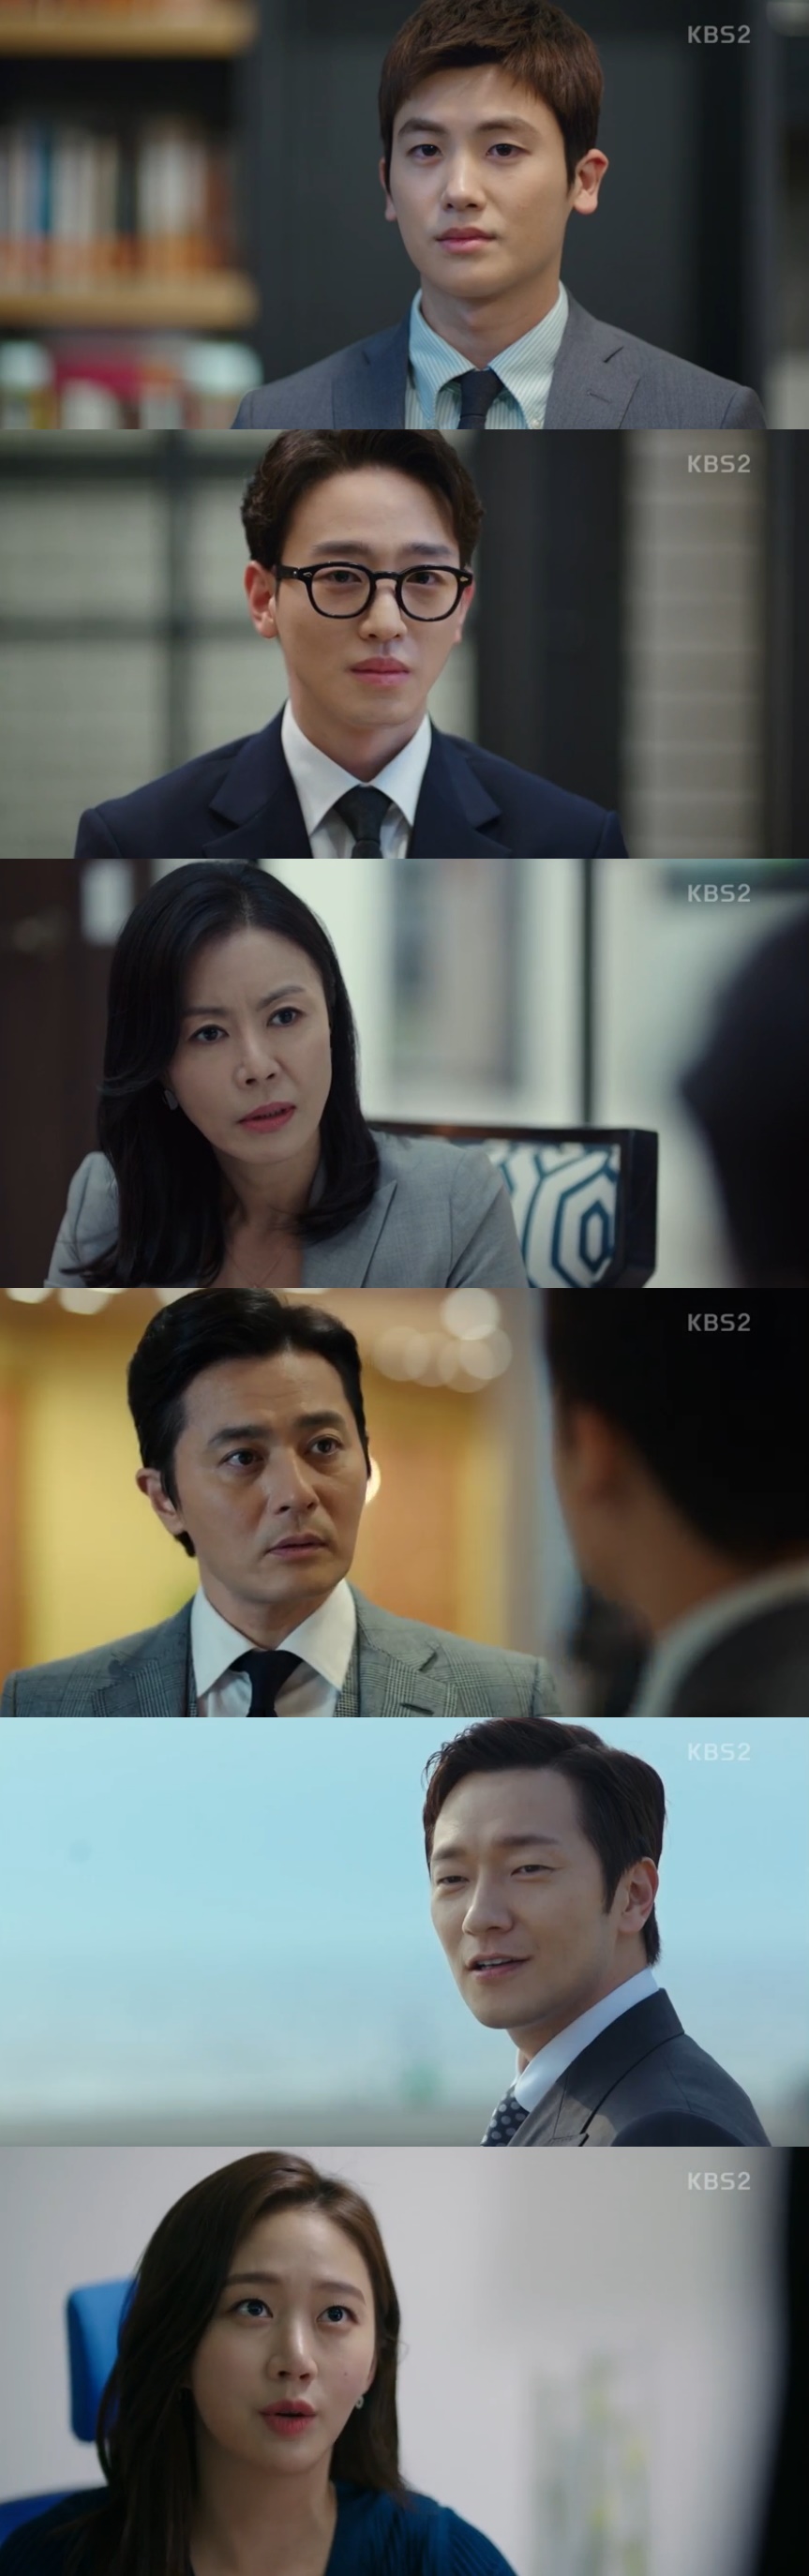 Suits Jang Dong-gun met a proper opponent.In the KBS2 drama Suits, which aired on the 9th, the process of Miniforce Seoks confrontation with his opponents lawyer David Kim (Son Seokgu) got on the air.On this day, Miniforce first found out that Yumi Pharmaceuticals request for side effects, which Kang Ha-yeon (Jin Hee-kyung) entrusted to him, was his ex-husband.He then handed a late marriage gift to Kang Hae-yeon and attracted attention.Miniforce added, If the former wife of the client is a company representative lawyer, it will surely act as a weakness.Kang Hae-yeon explained, Kim has a woman who divorced and met me.Meanwhile, Tabitkim (Son Seokgu) popped up the Miniforce stone.He said that Kang Ha-yeon, the representative of Kang & Ham, is a lawyer for Noxy Chemical, a class action lawsuit.In particular, he said, I almost met you at the Harvard University mock trial, but I could not attend the car accident and you became a legend in the trial.It was won in a trial without a hitter four times. Miniforce said, I do not care who you are, so go where you play. However, soon after that, he went to Kang Hae-yeon and showed his desire to take the case.In addition, he said he would proceed with the lawsuit against Yumi Pharmaceutical simultaneously, saying, If I am an ace, I should run as a double header sometimes.However, David and his team handed the Miniforce Seok a suck with a setlement and also angry with Park Hyung-sik, saying, Lets try to get a good shot.At that time, Yumi Pharmaceutical filed a lawsuit against the previous lawsuit, and the plaintiffs lawyer demanded a punitive damages system and demanded 20 billion won in compensation.Miniforce said he would rather go to trial than consensus.When the other sides lawyer tried to use public opinion, Ko Yeon-woo also asked to respond with public opinion, but Miniforce advised not to sympathize with anyone.The trial court of Kang & Ham will be held on this day, showing new lawyers their abilities and a great opportunity for partner lawyers to see.So, Ko Yeon-woo, a fake Ussault lawyer, was also standing.David Kim moved in earnest: he stimulated the Miniforce seat, and then released the Settlement aloud in the place where the manuscripts were gathered.Miniforce said, This is terrorism and crime. And I have called the plaintiffs without my consent. Is this American shit?David Kim did not move, but flew his business card and flew a heavy fastball in the Miniforce seat.In the end, Miniforce admitted to Ko Yeon-woo that David Kim was one of the tops of his own, and Ko Yeon-woo advised, Tell me to change your position and become a lawyer.Miniforce also accepted Ko Yeon-woos advice, saying, I will have a play style that I never do. Miniforce said to Kang Ha-yeon, It is not like you.Just know that much, he dismissed and predicted a confrontation with David Kim.At the end of the broadcast, Ko Yeon-woo also got a curiosity about the future development by receiving the back of the opponent in the mock trial.